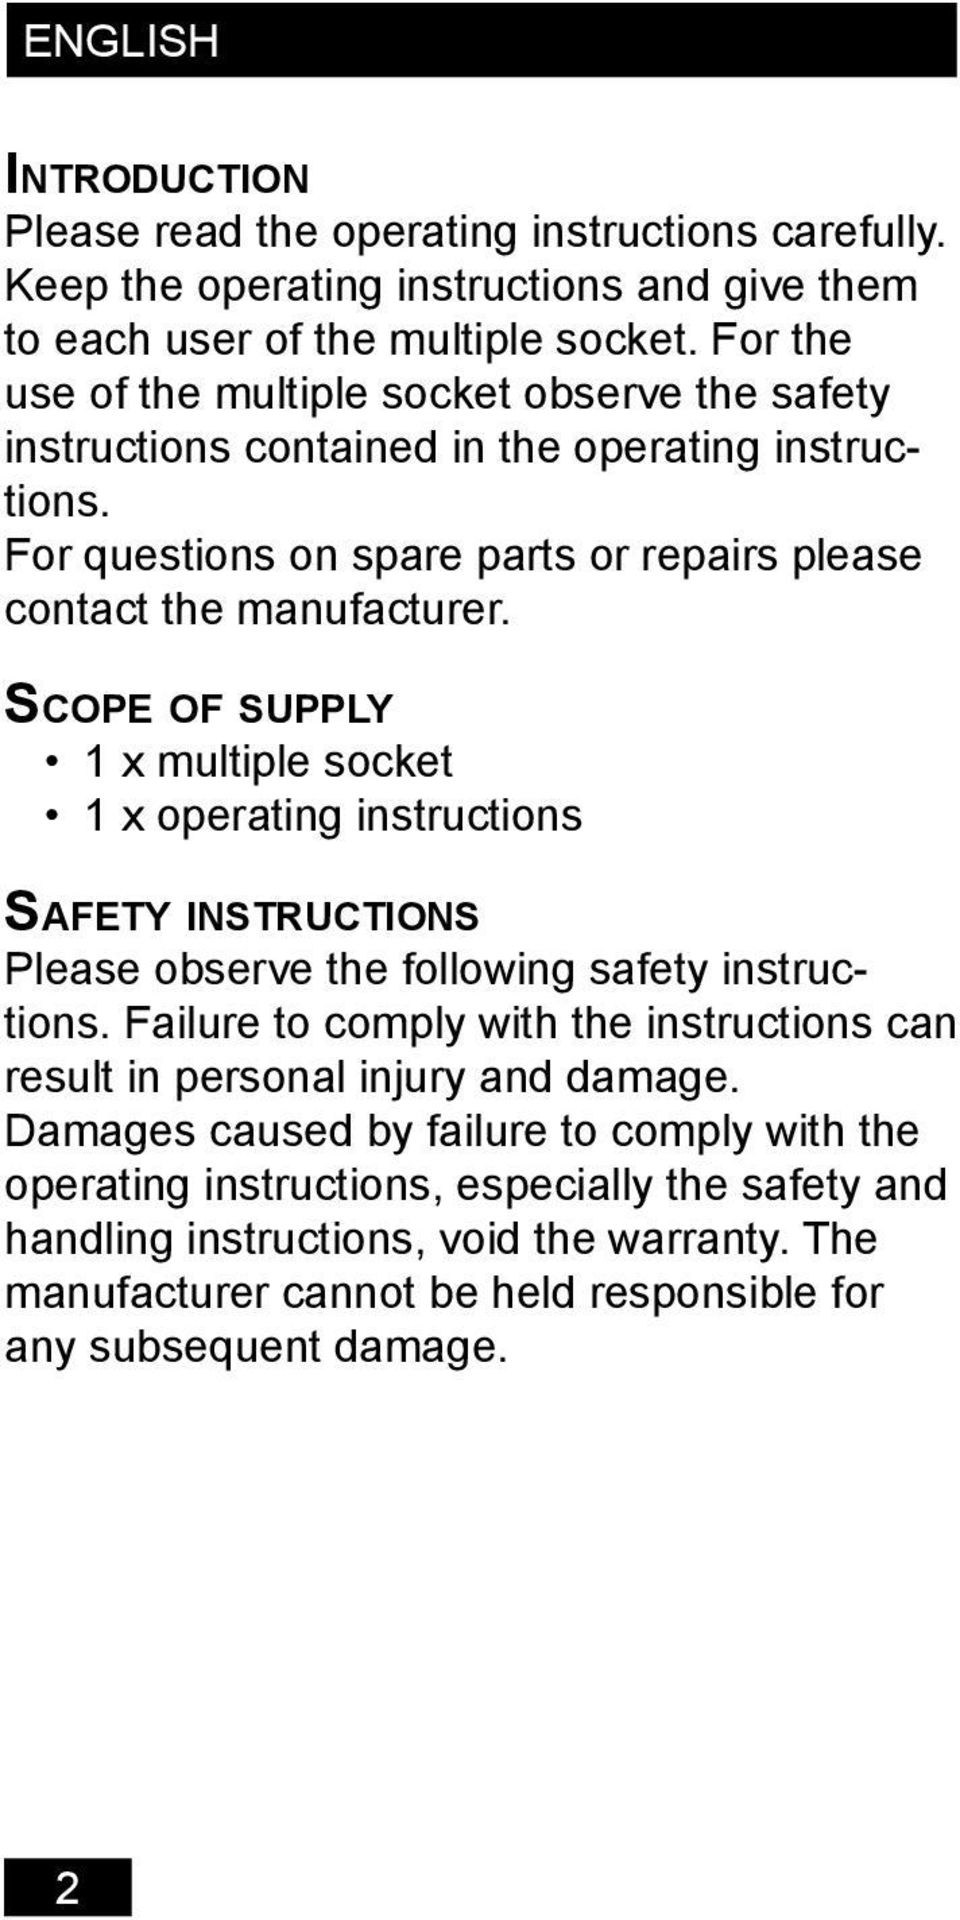 SCOPE OF SUPPLY 1 x multiple socket 1 x operating instructions SAFETY INSTRUCTIONS Please observe the following safety instructions.